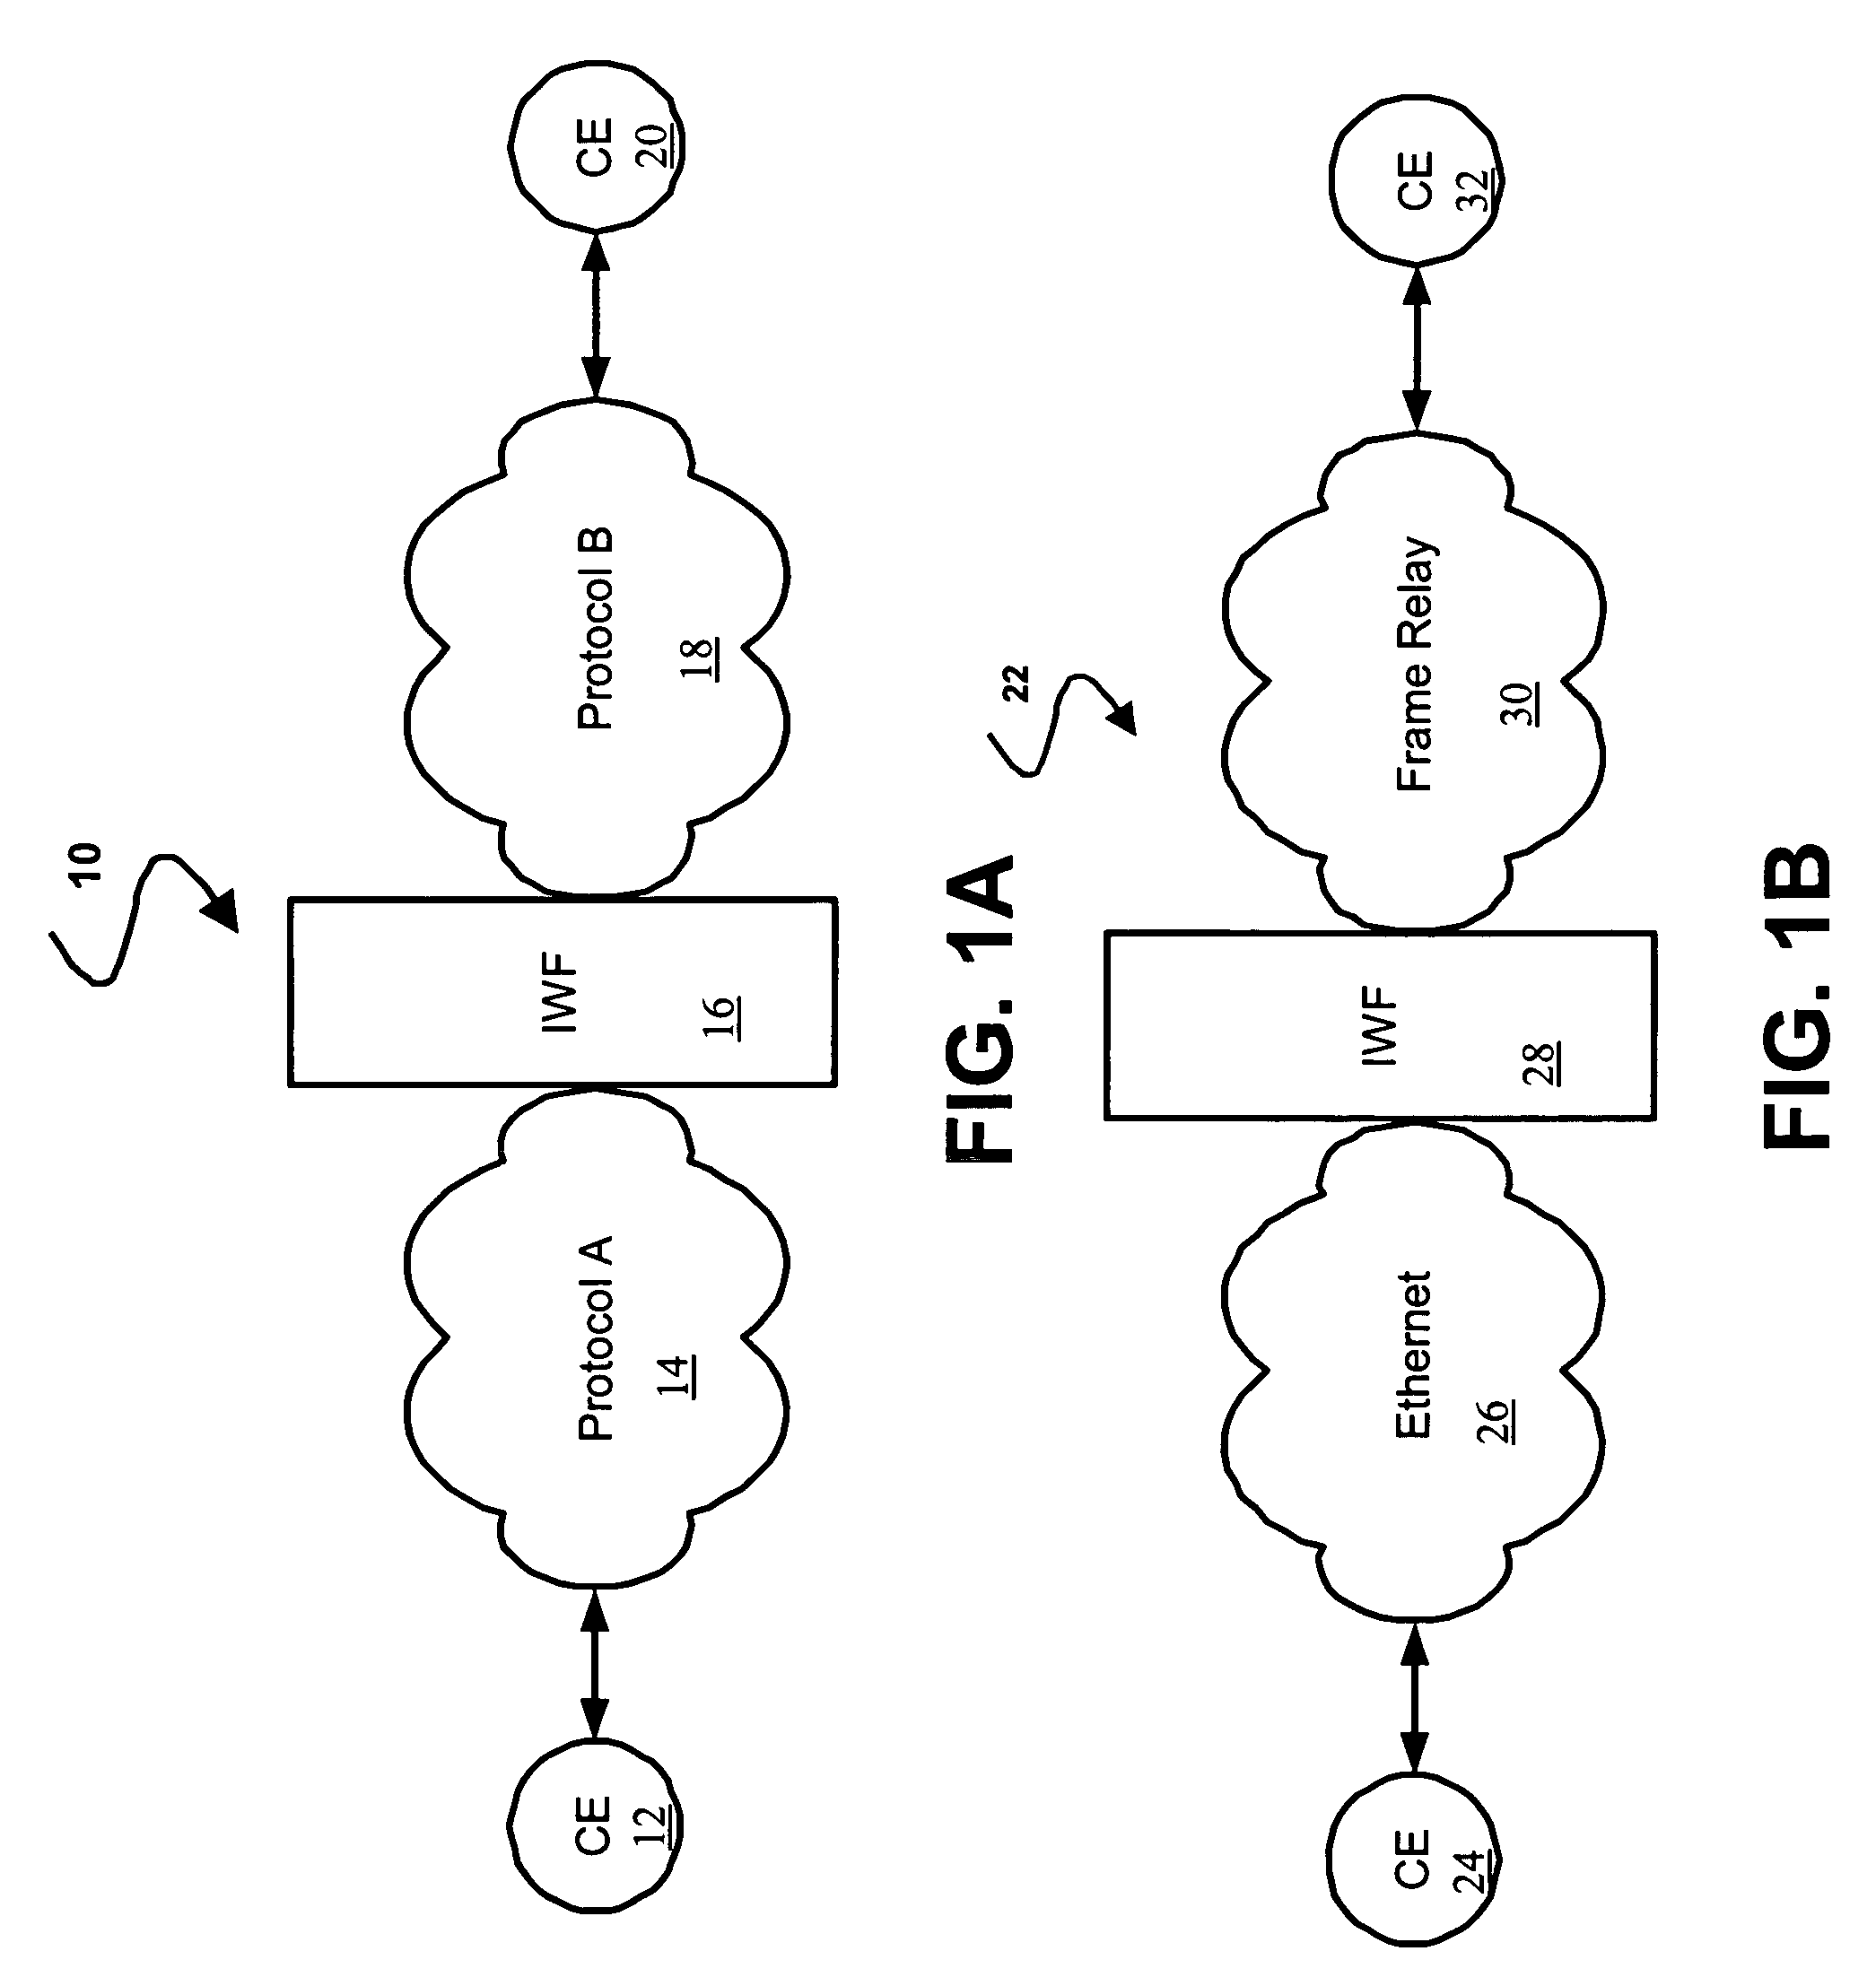 Method and system for frame relay and ethernet service interworking